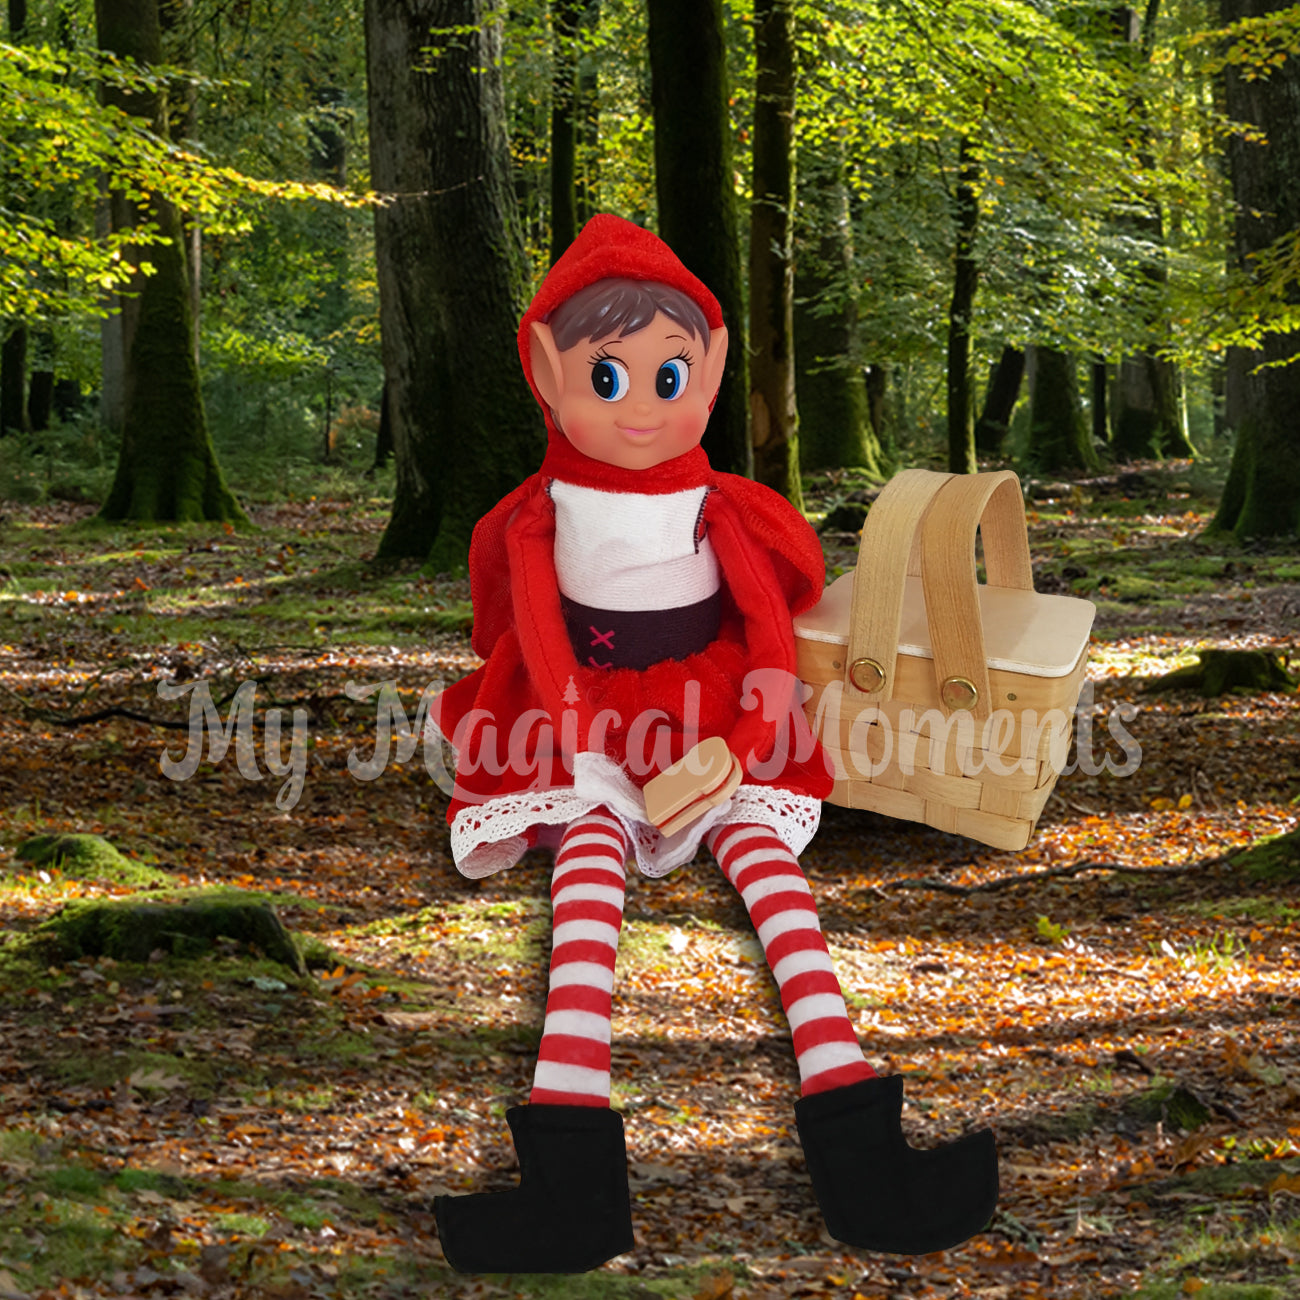 Elves Behavin badly dressed as red riding hood and a elf sized picnic basket